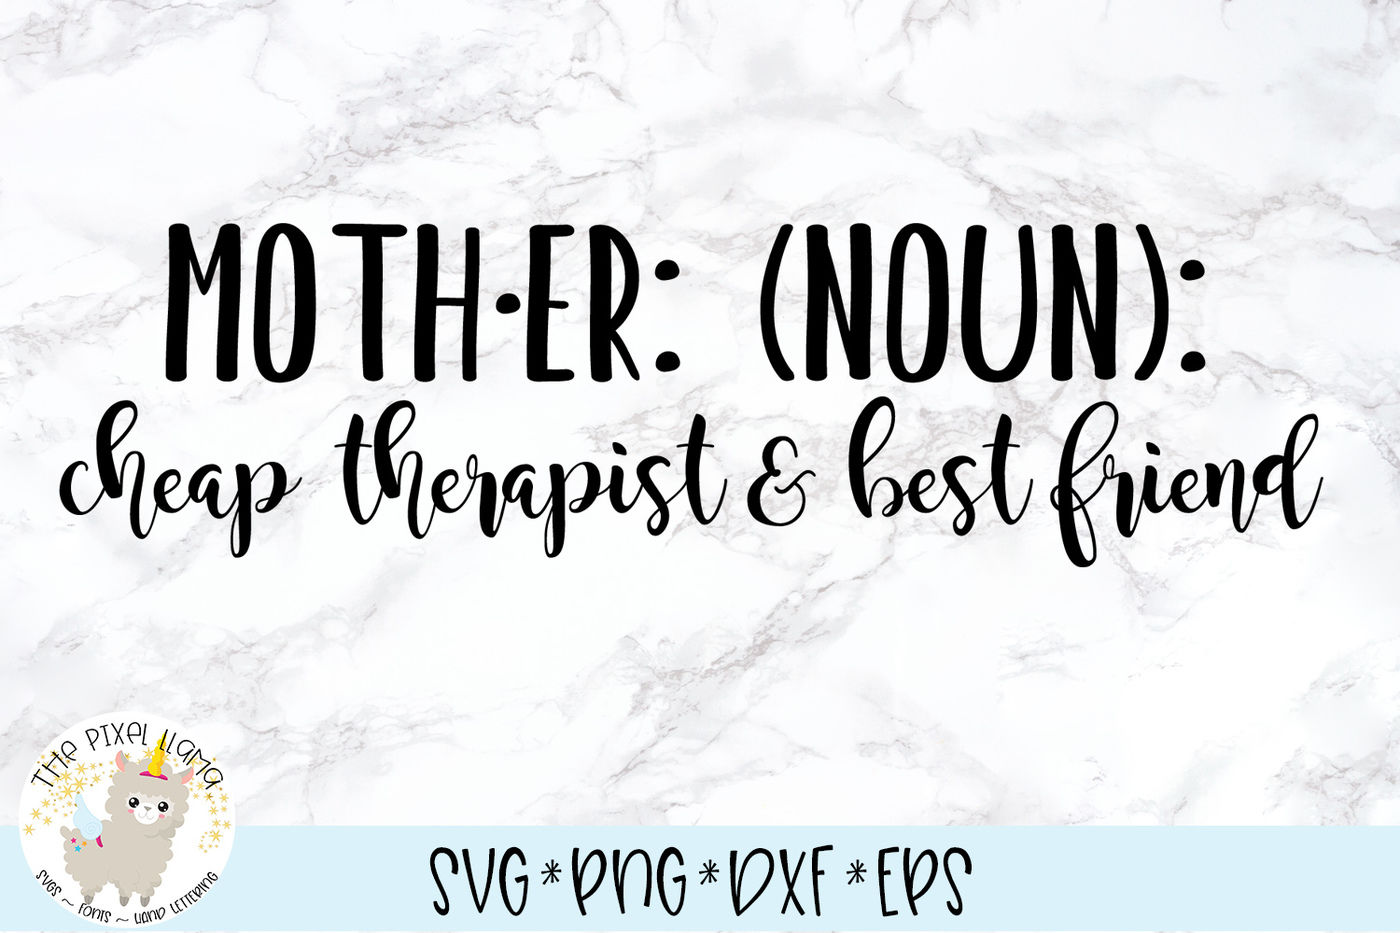 Download Mother Cheap Therapist Best Friend Svg Cut File By The Pixel Llama Thehungryjpeg Com